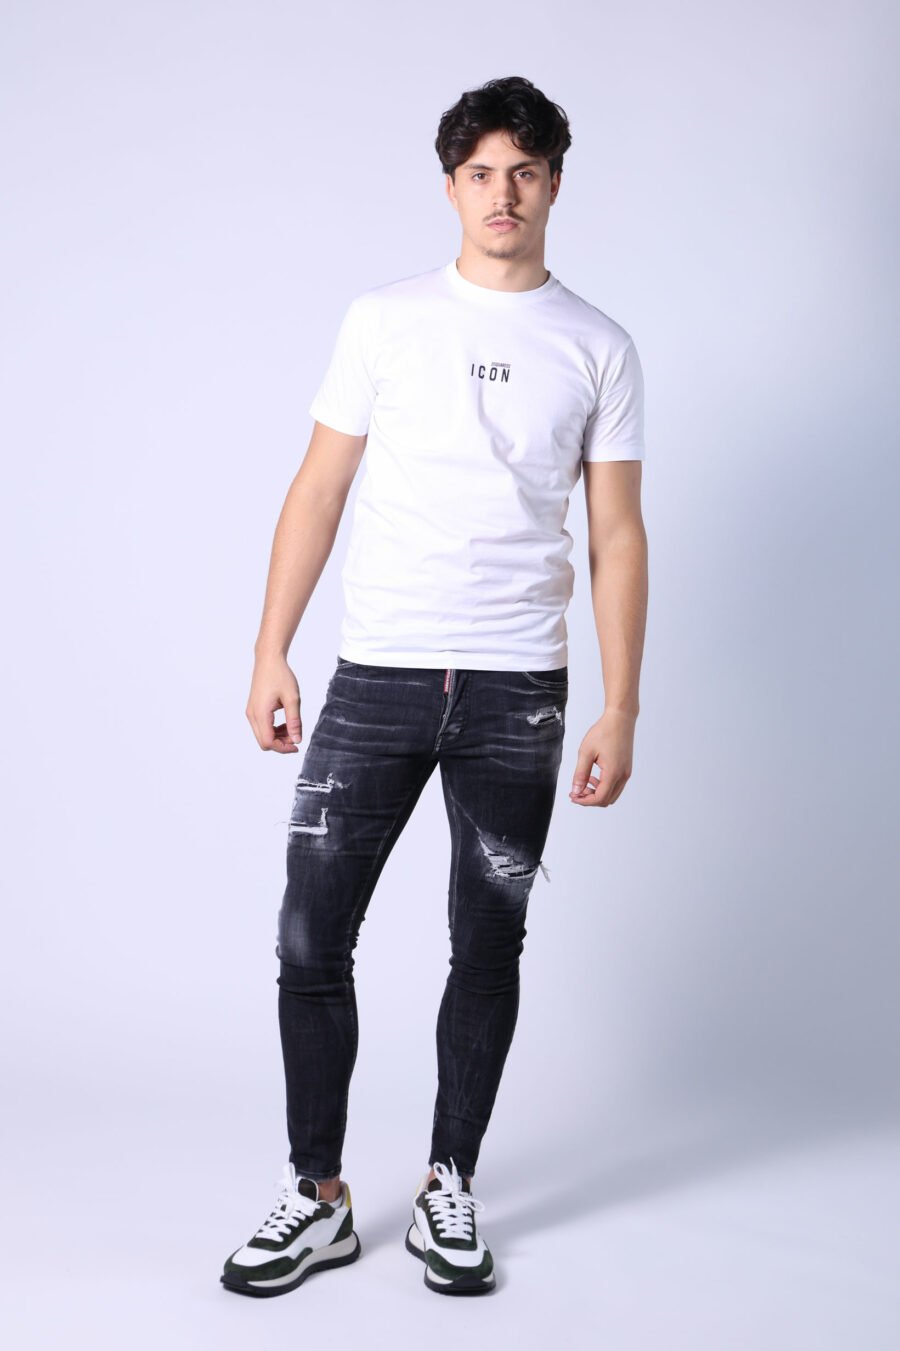 Skater jean trousers black with rips and semi-worn - Untitled Catalog 05315 1